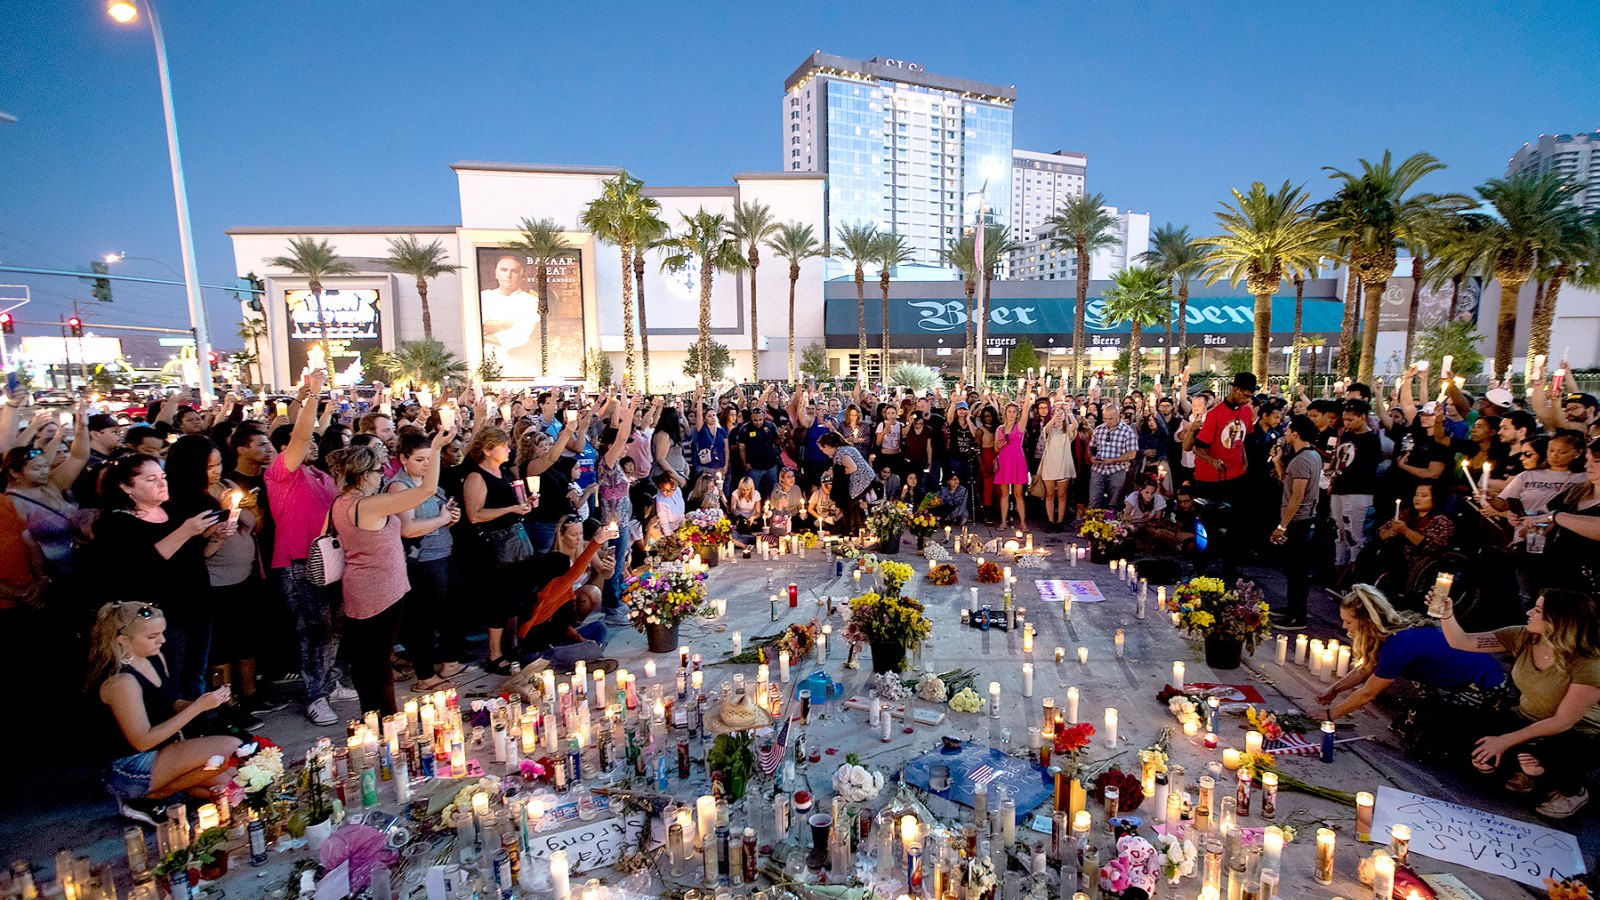 Mourners hold their candles in the air during a moment of silence during a vigil to mark one week since the mass shooting at the Route 91 Harvest country music festival, on the corner of Sahara Avenue and Las Vegas Boulevard at the north end of the Las Vegas Strip, on October 8, 2017 in Las Vegas, Nevada.